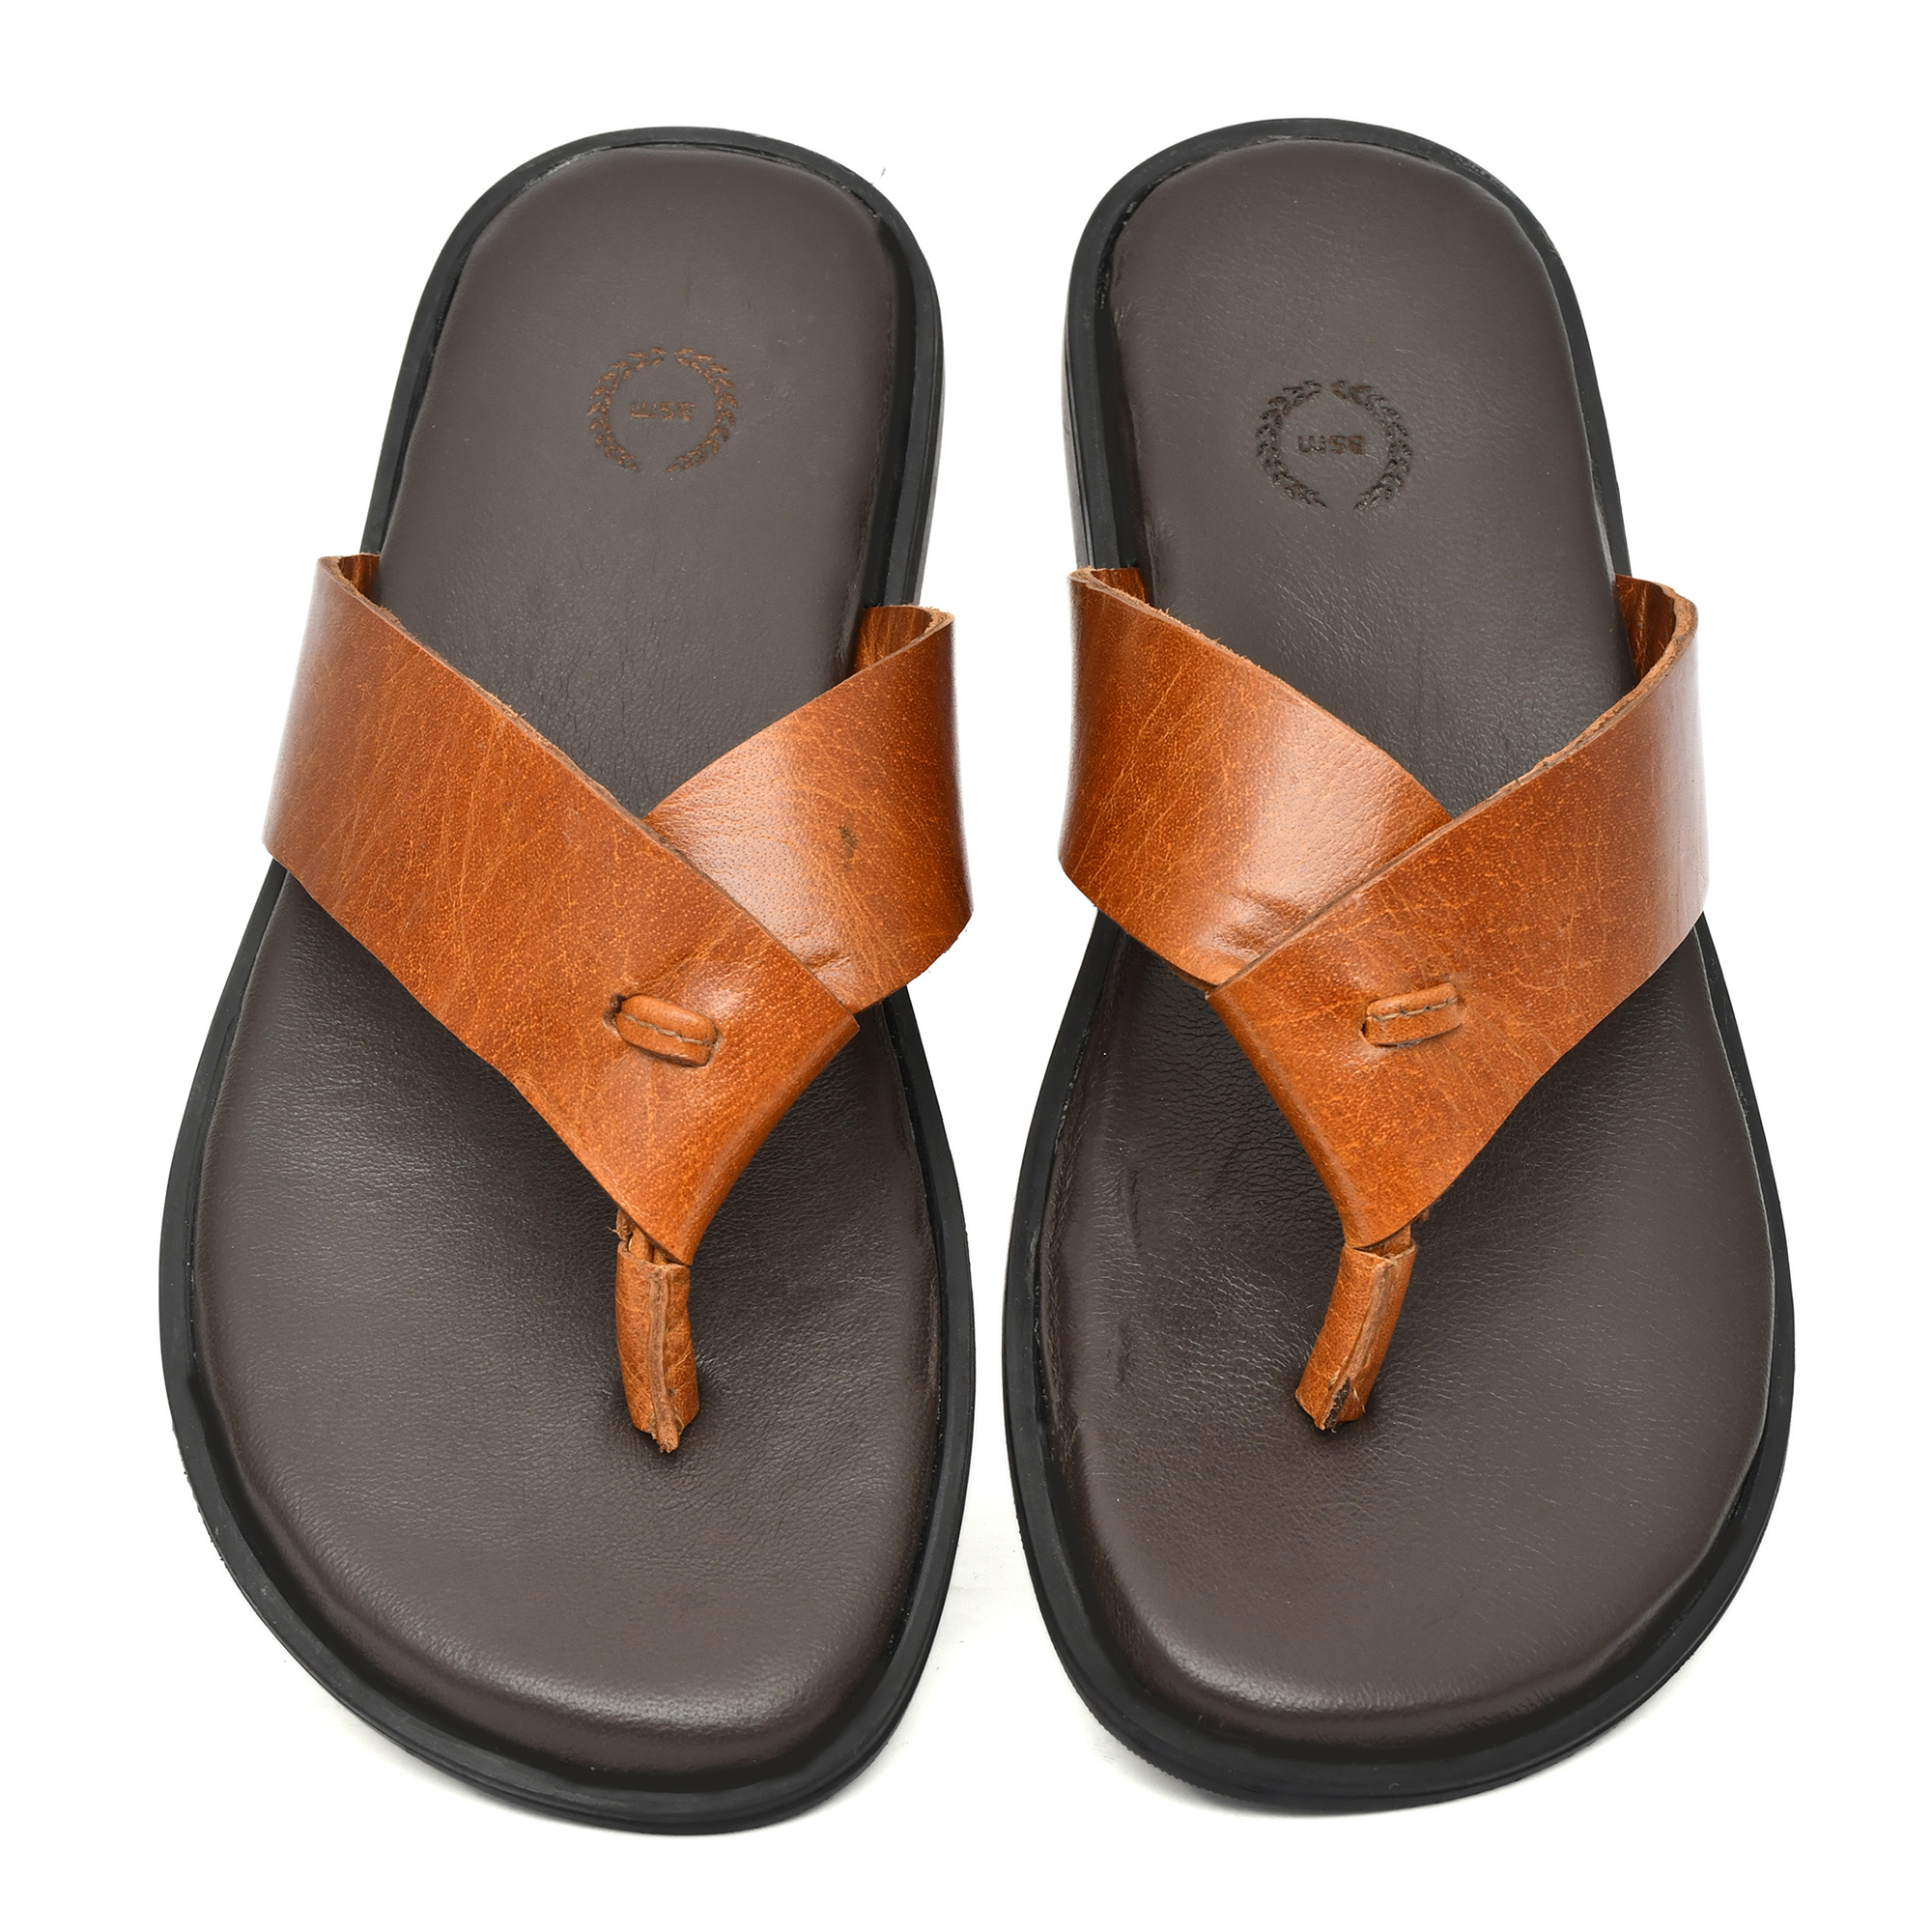 Tan Leather Slippers for Men with Memory foam footpad by asm.